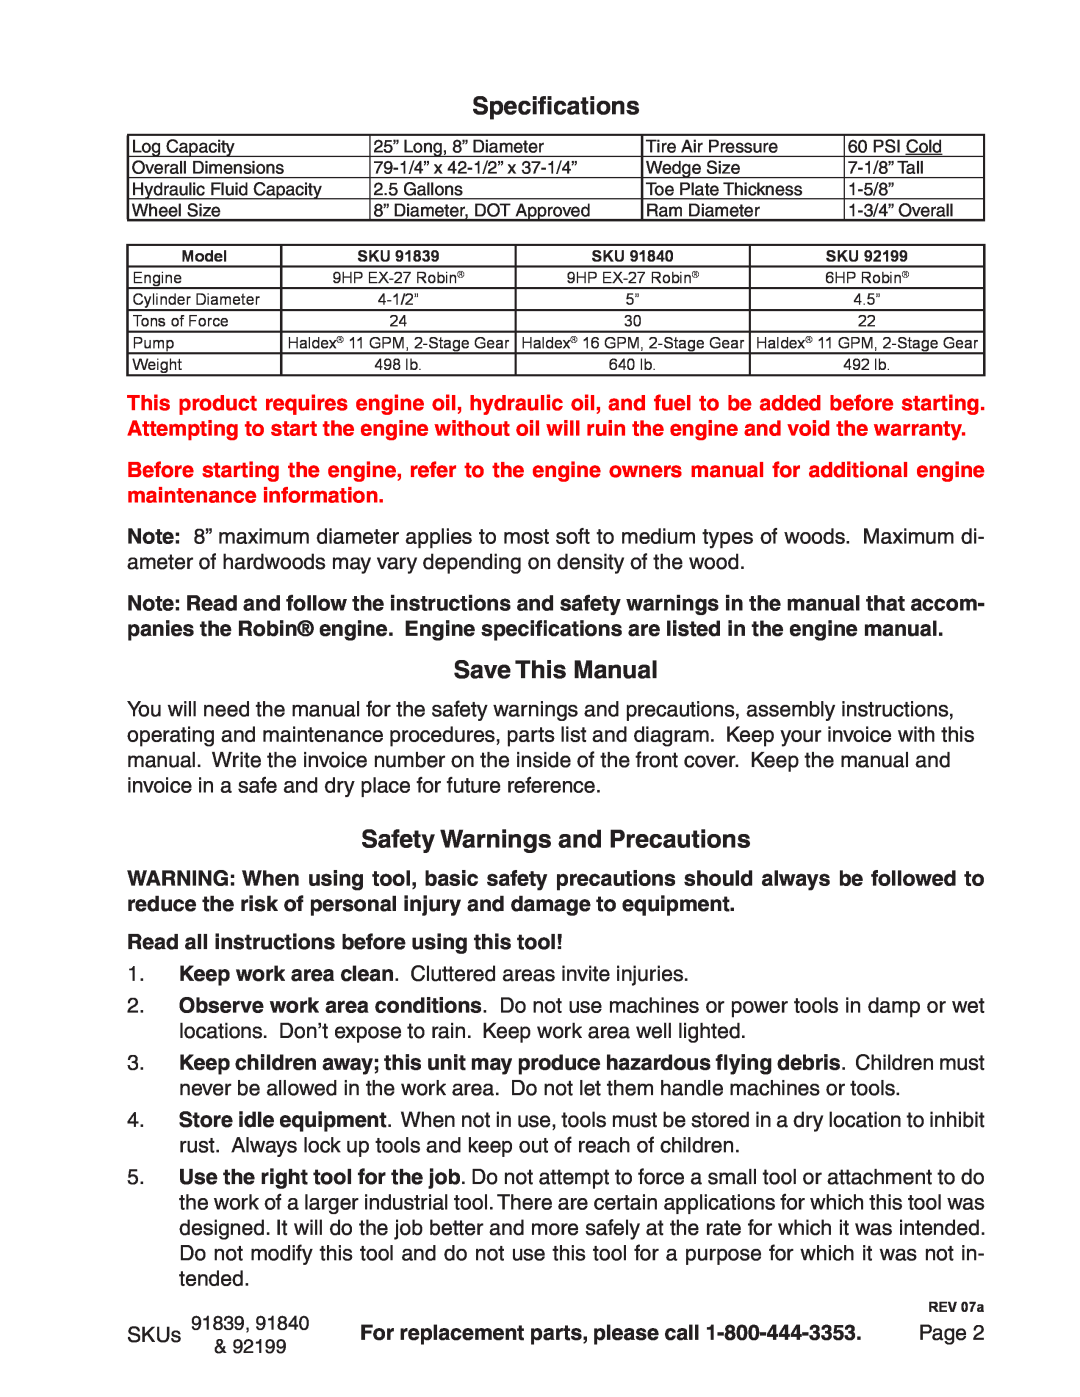 Harbor Freight Tools 91840, 91839, 92199 manual Specifications, Save This Manual, Safety Warnings and Precautions 